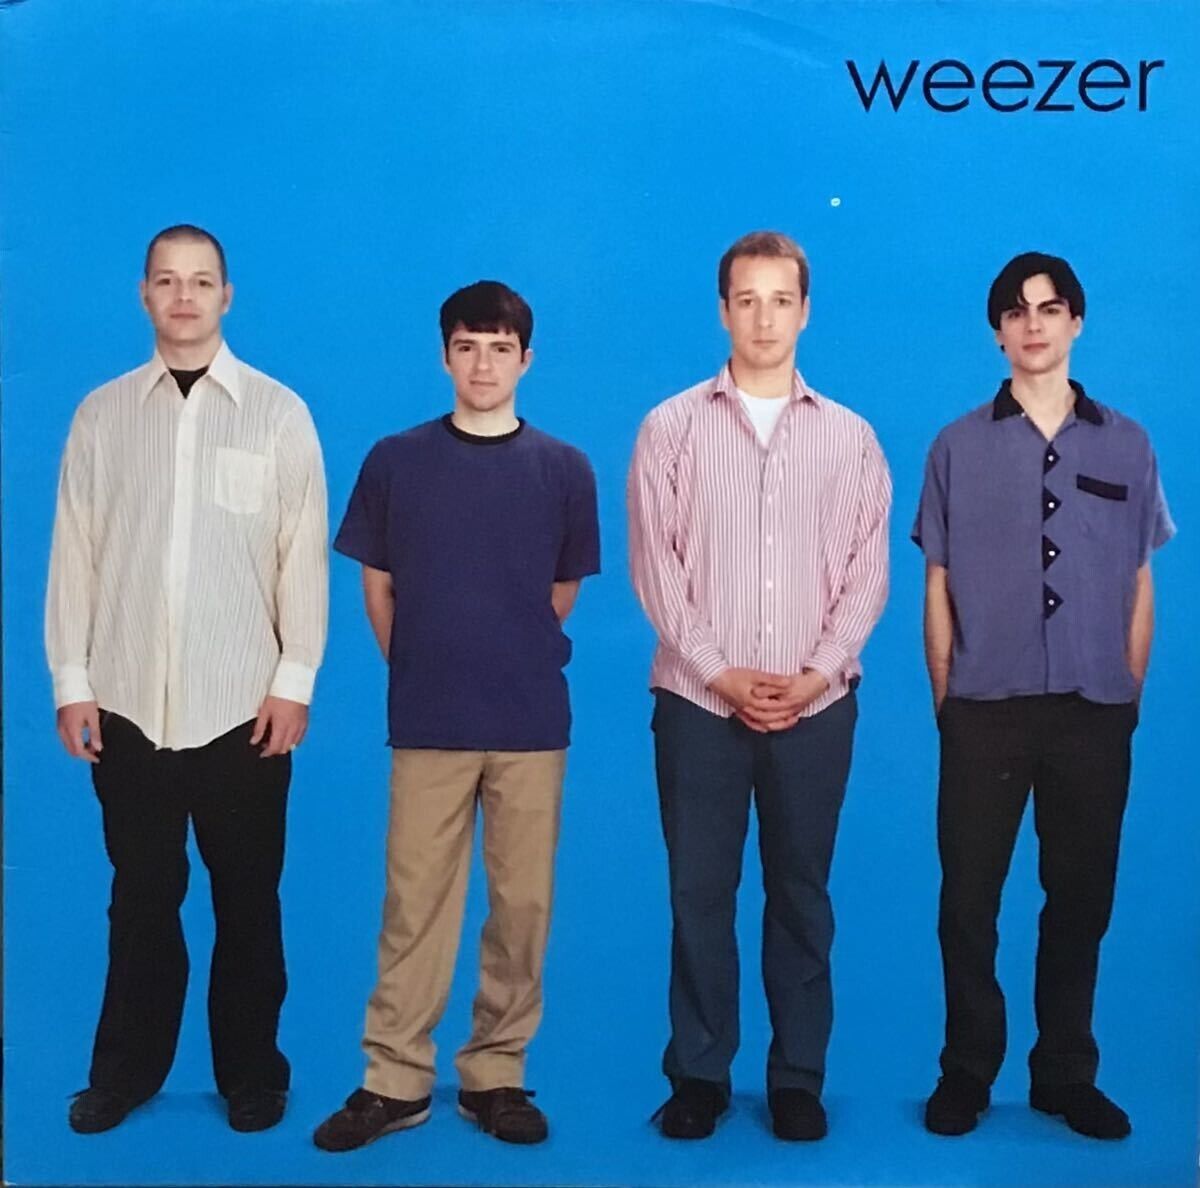 The album Weezer (commonly known as the Blue Album), was released on May 10, 1994. Image courtesy of the L.A. Times.